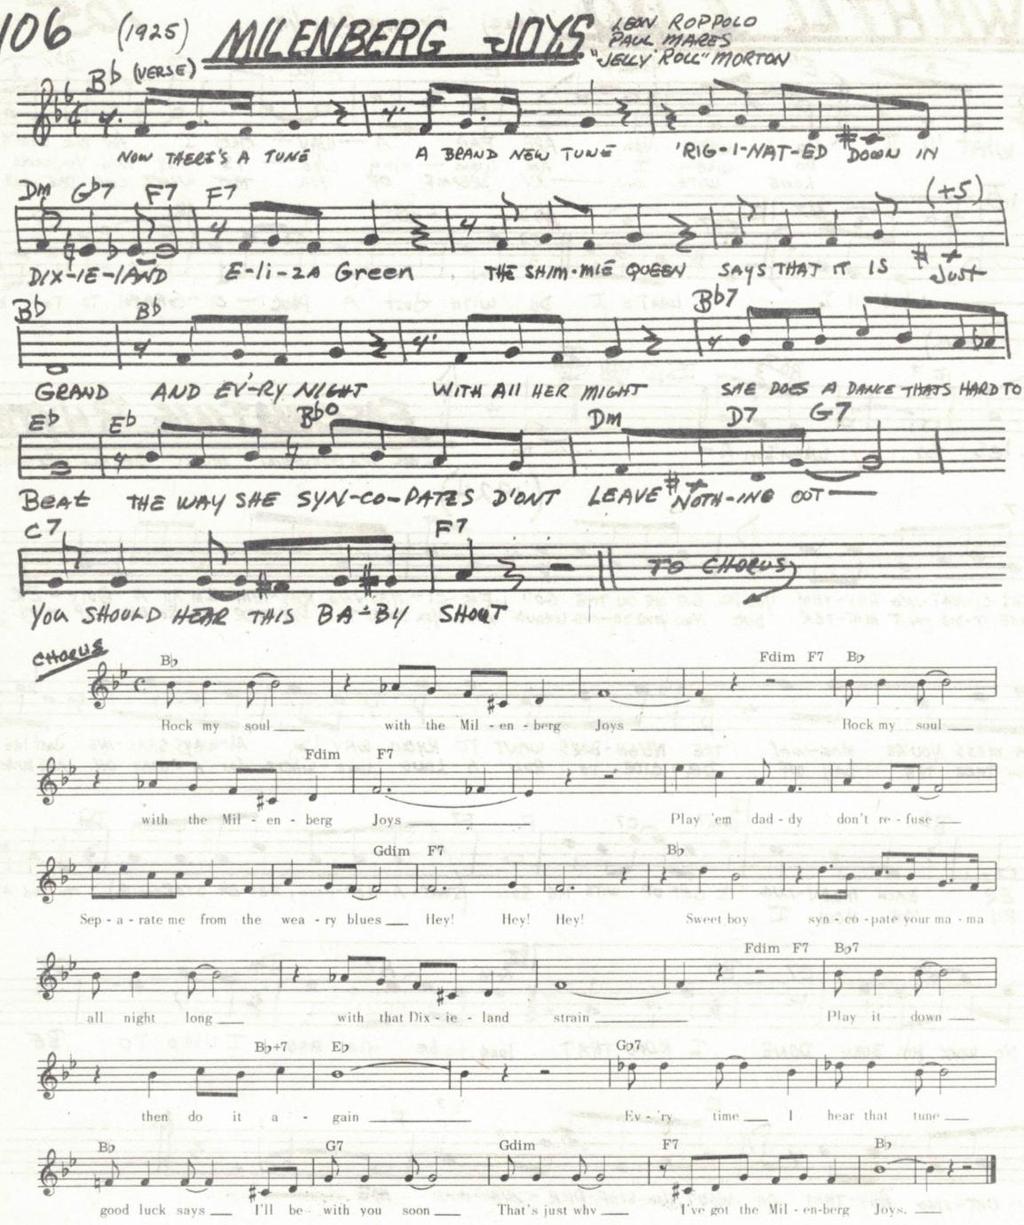 20 Milenberg Joys -1925 New Orleans Blues - 1925 This is a 12 bar blues Tango, using what is called the rhythm of the Spanish Tinge. Two themes emerge.